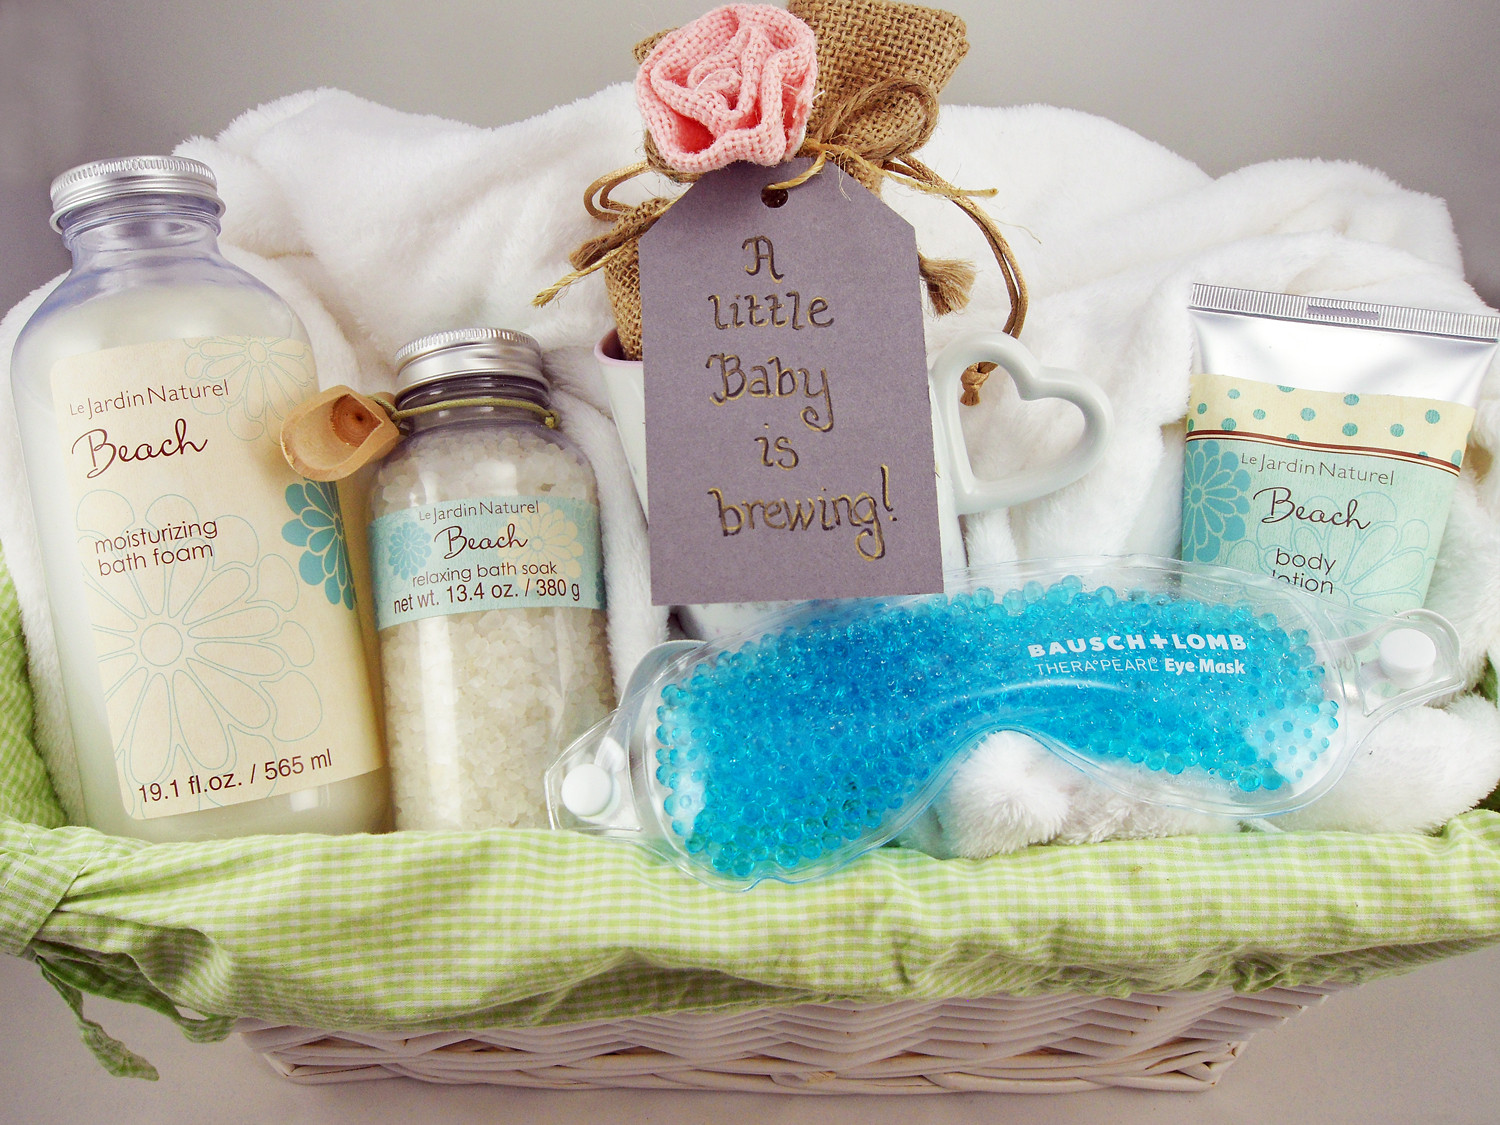 Unique Baby Gifts 2015
 Expecting Couples Love These Unique Personalized Baby Gifts